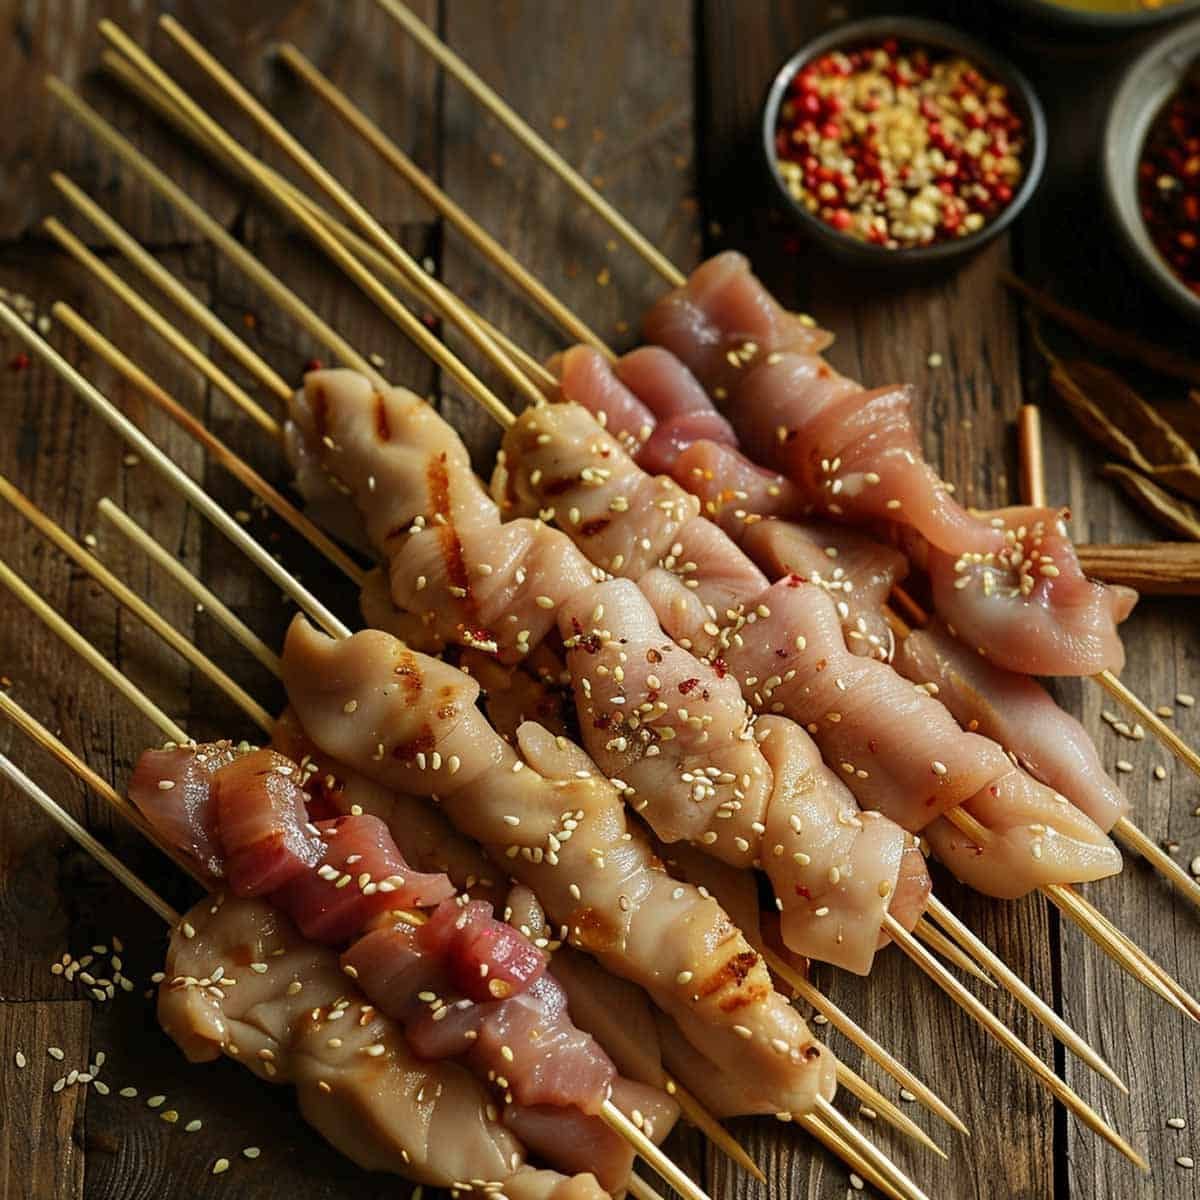 Chicken skewers ready for grilling, marinated and skewered 